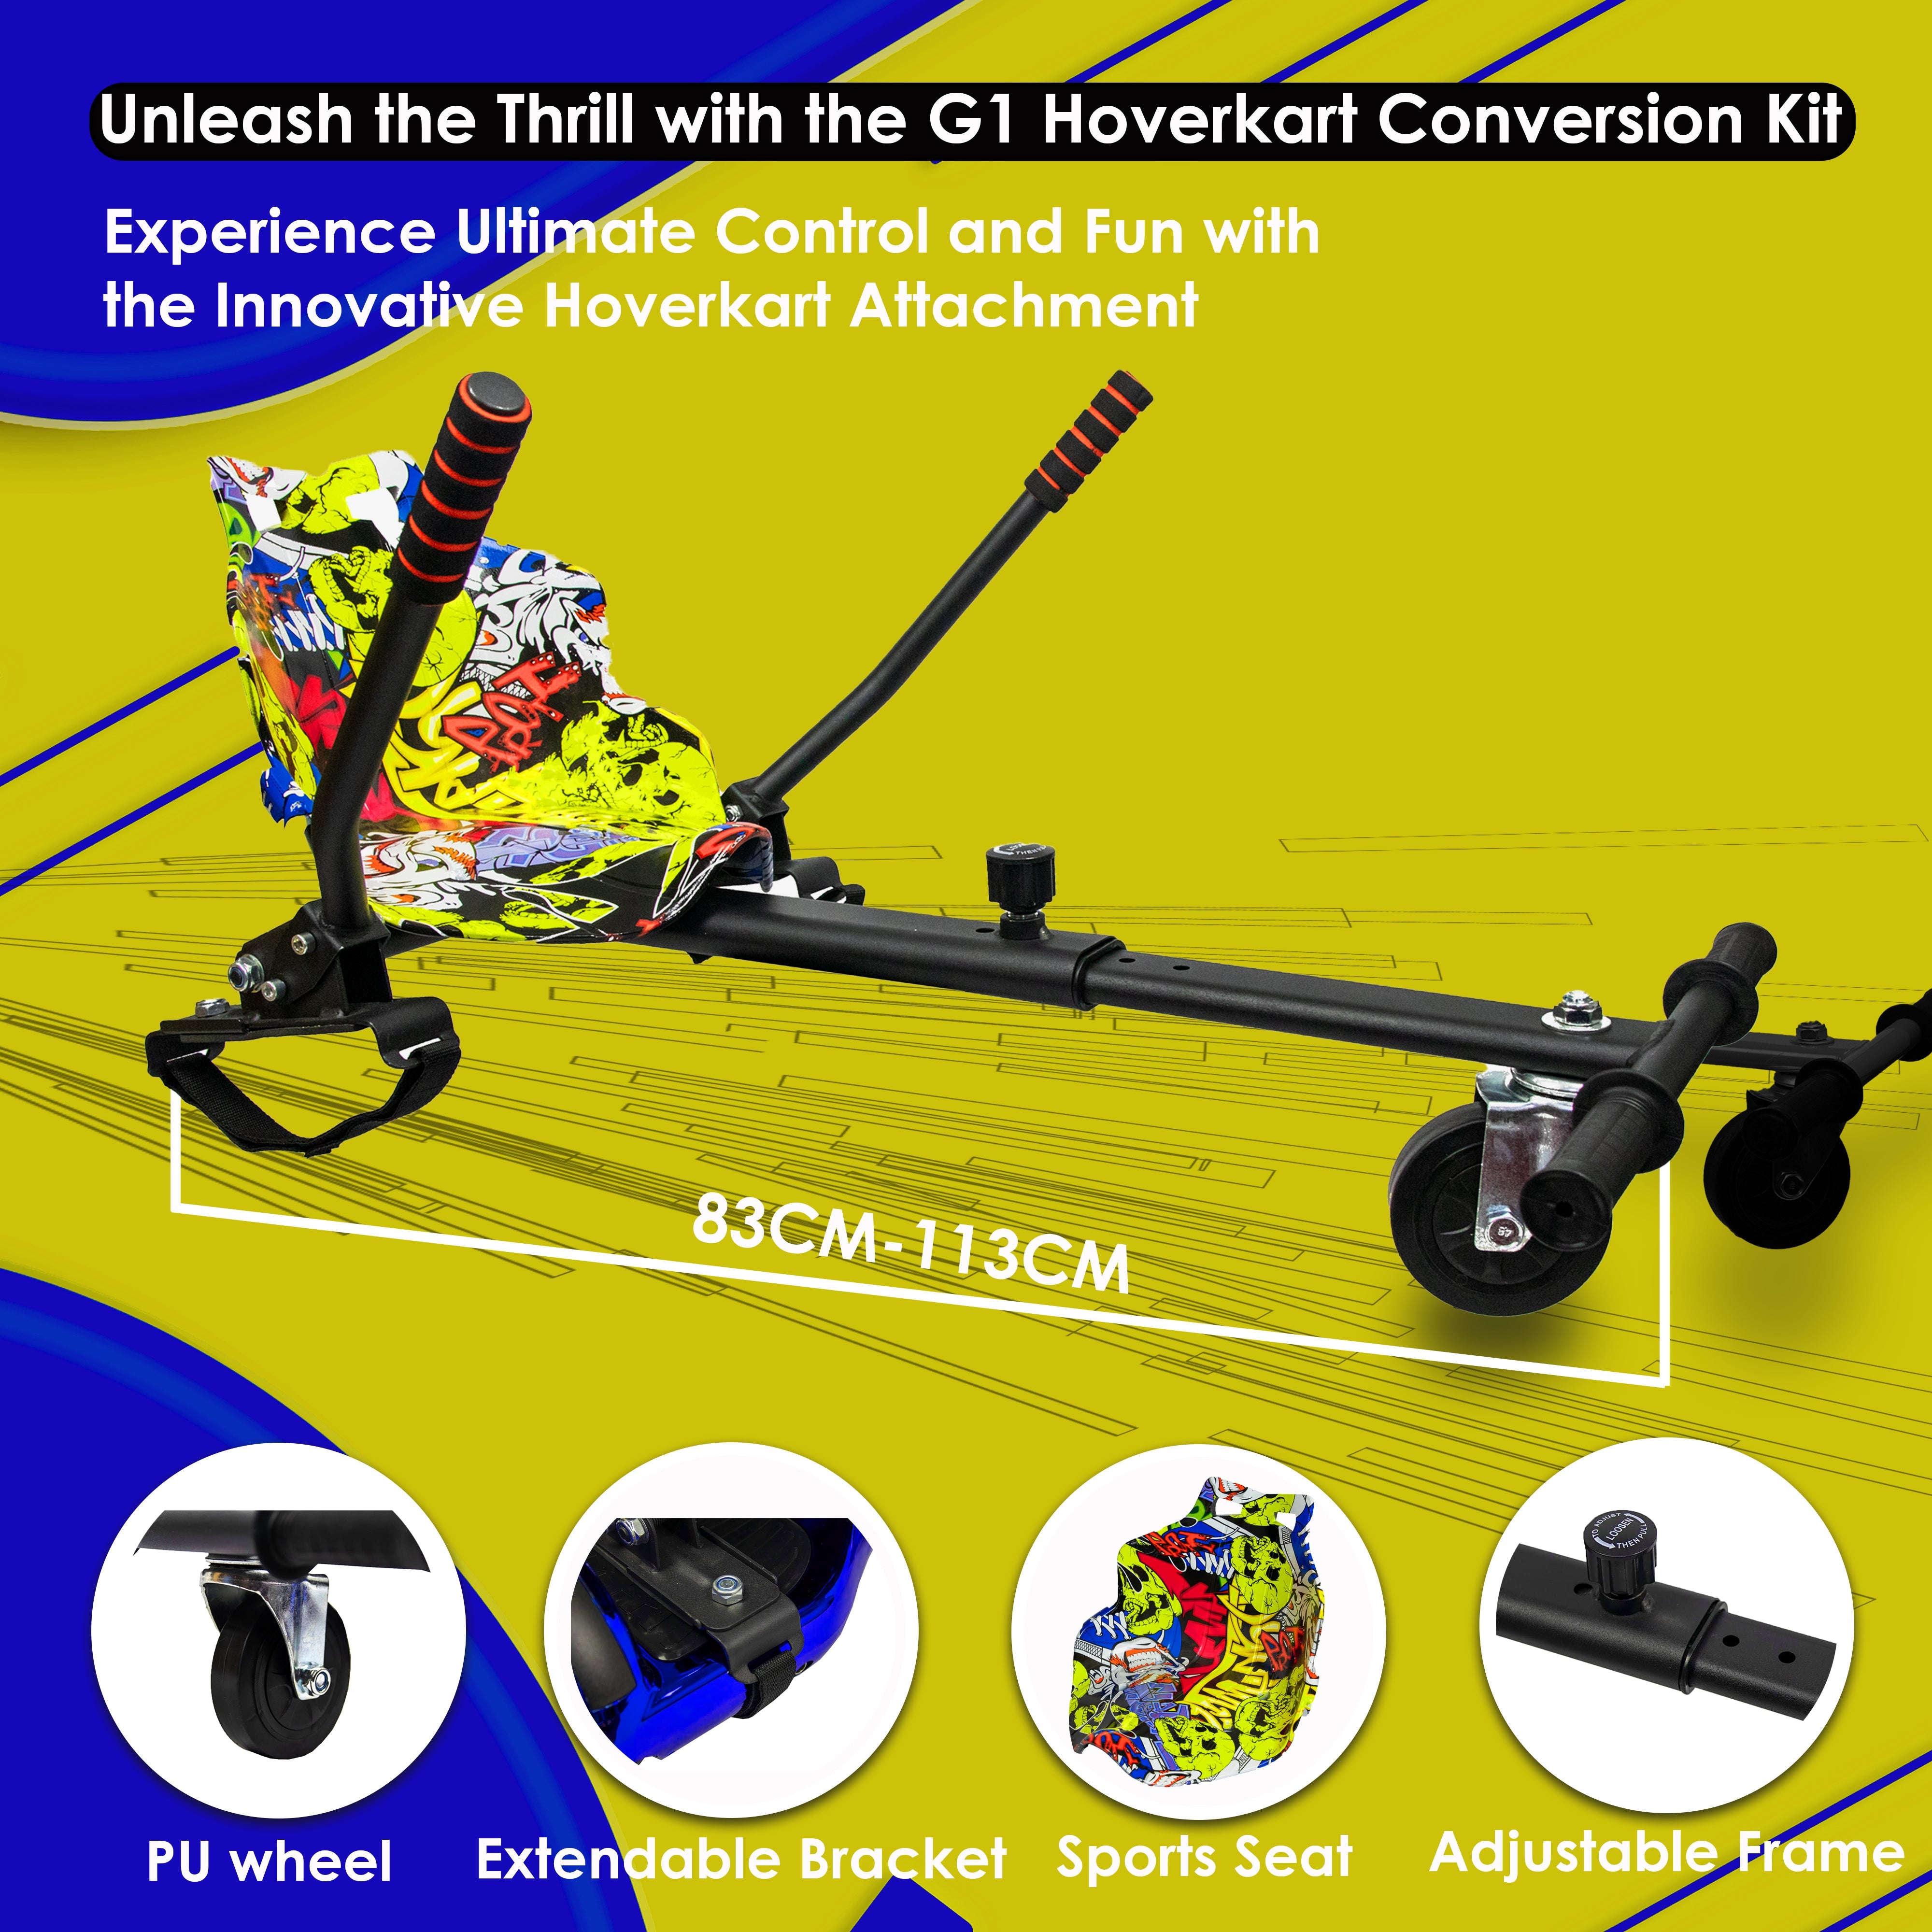 Hoverkart with extendable frame, PU wheels, and a colorful sports seat highlighted on a yellow layout